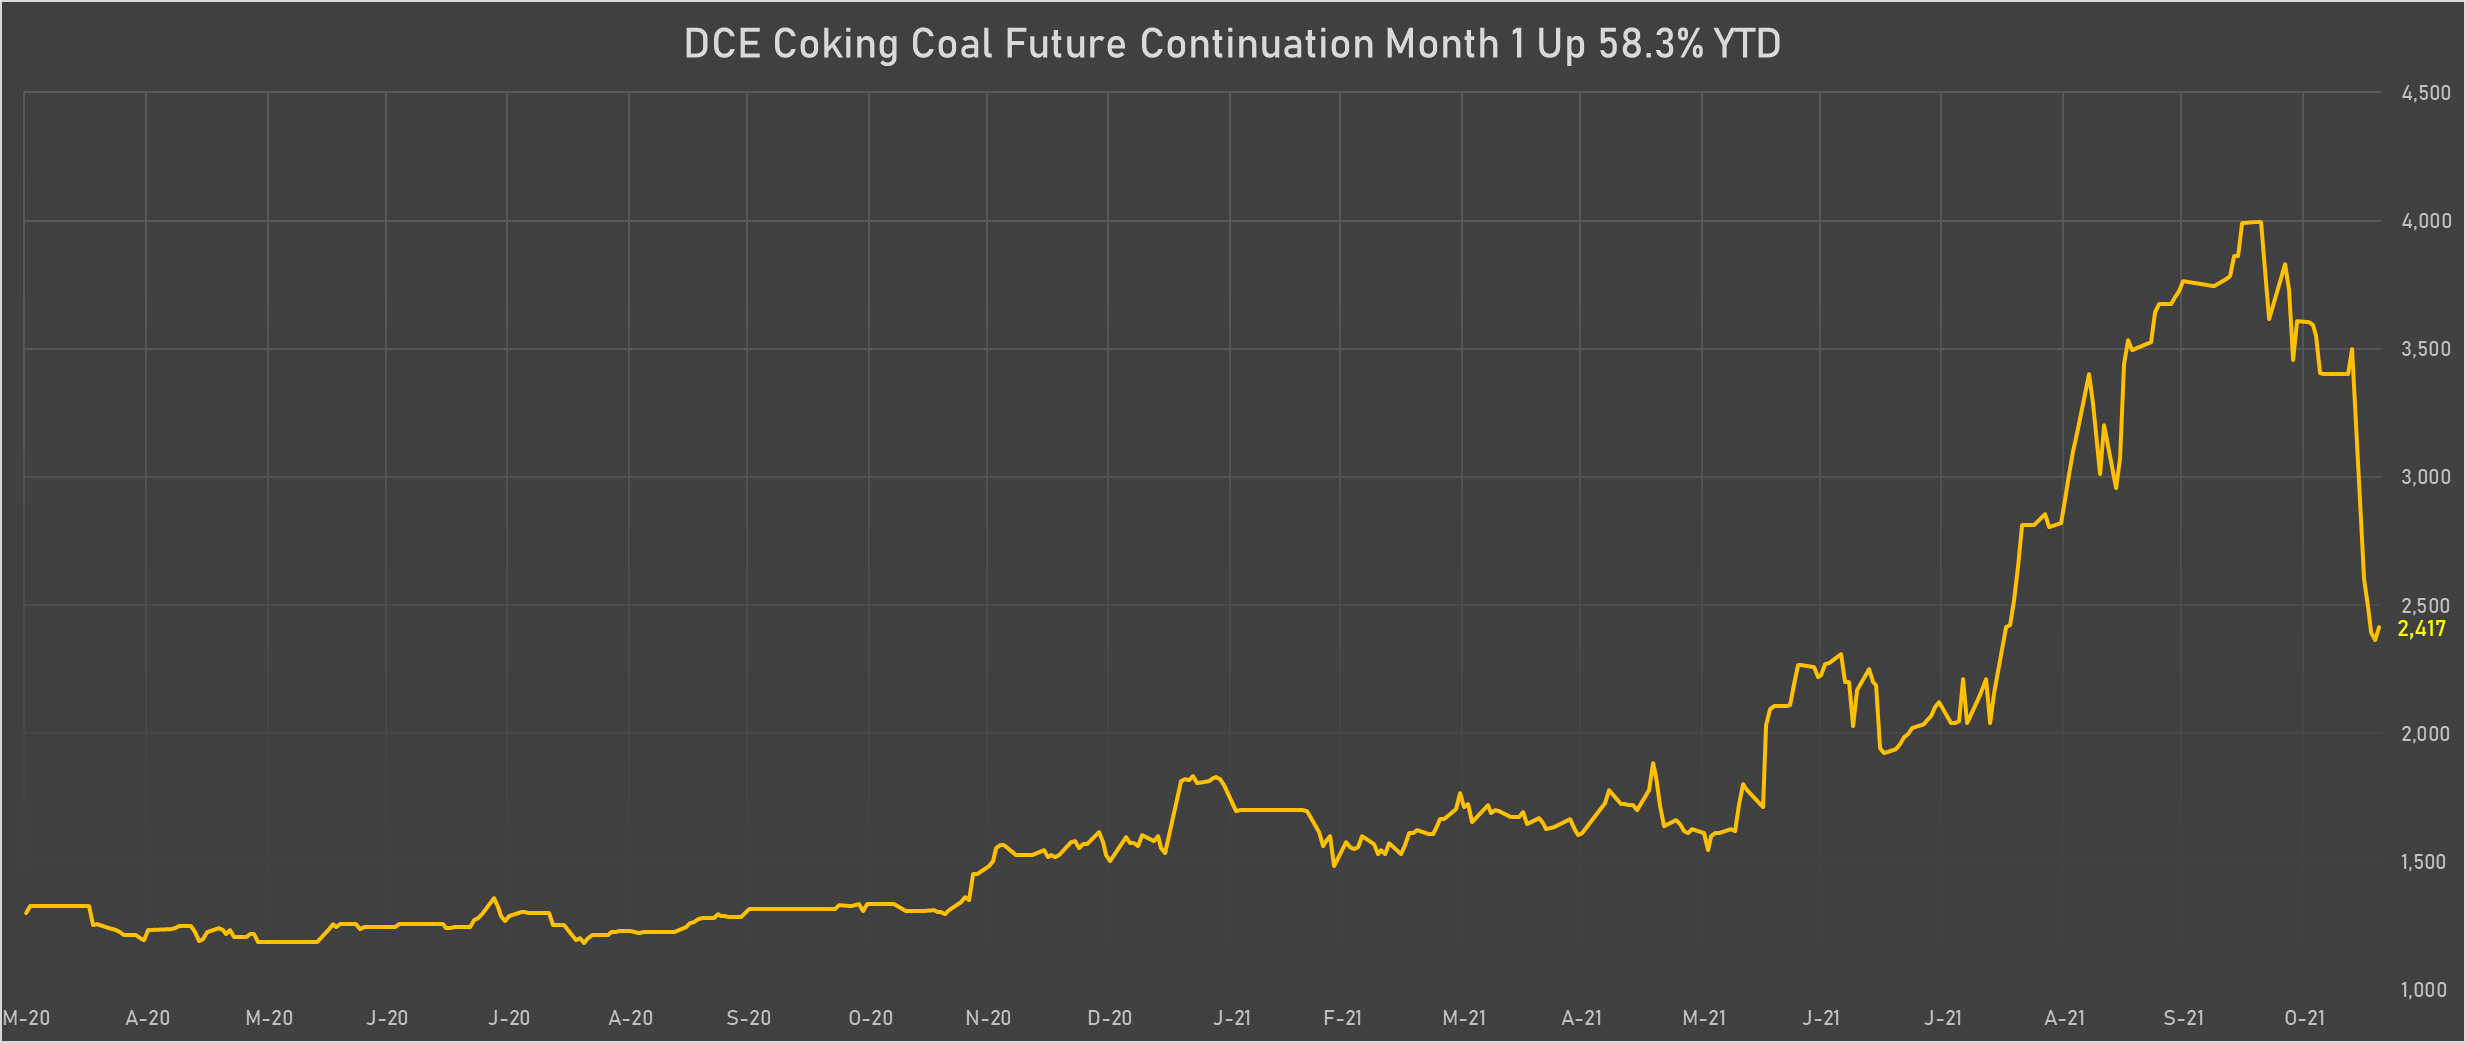 DCE Coking Coal Front-Month Futures Prices | Sources: phipost.com, Refinitiv data